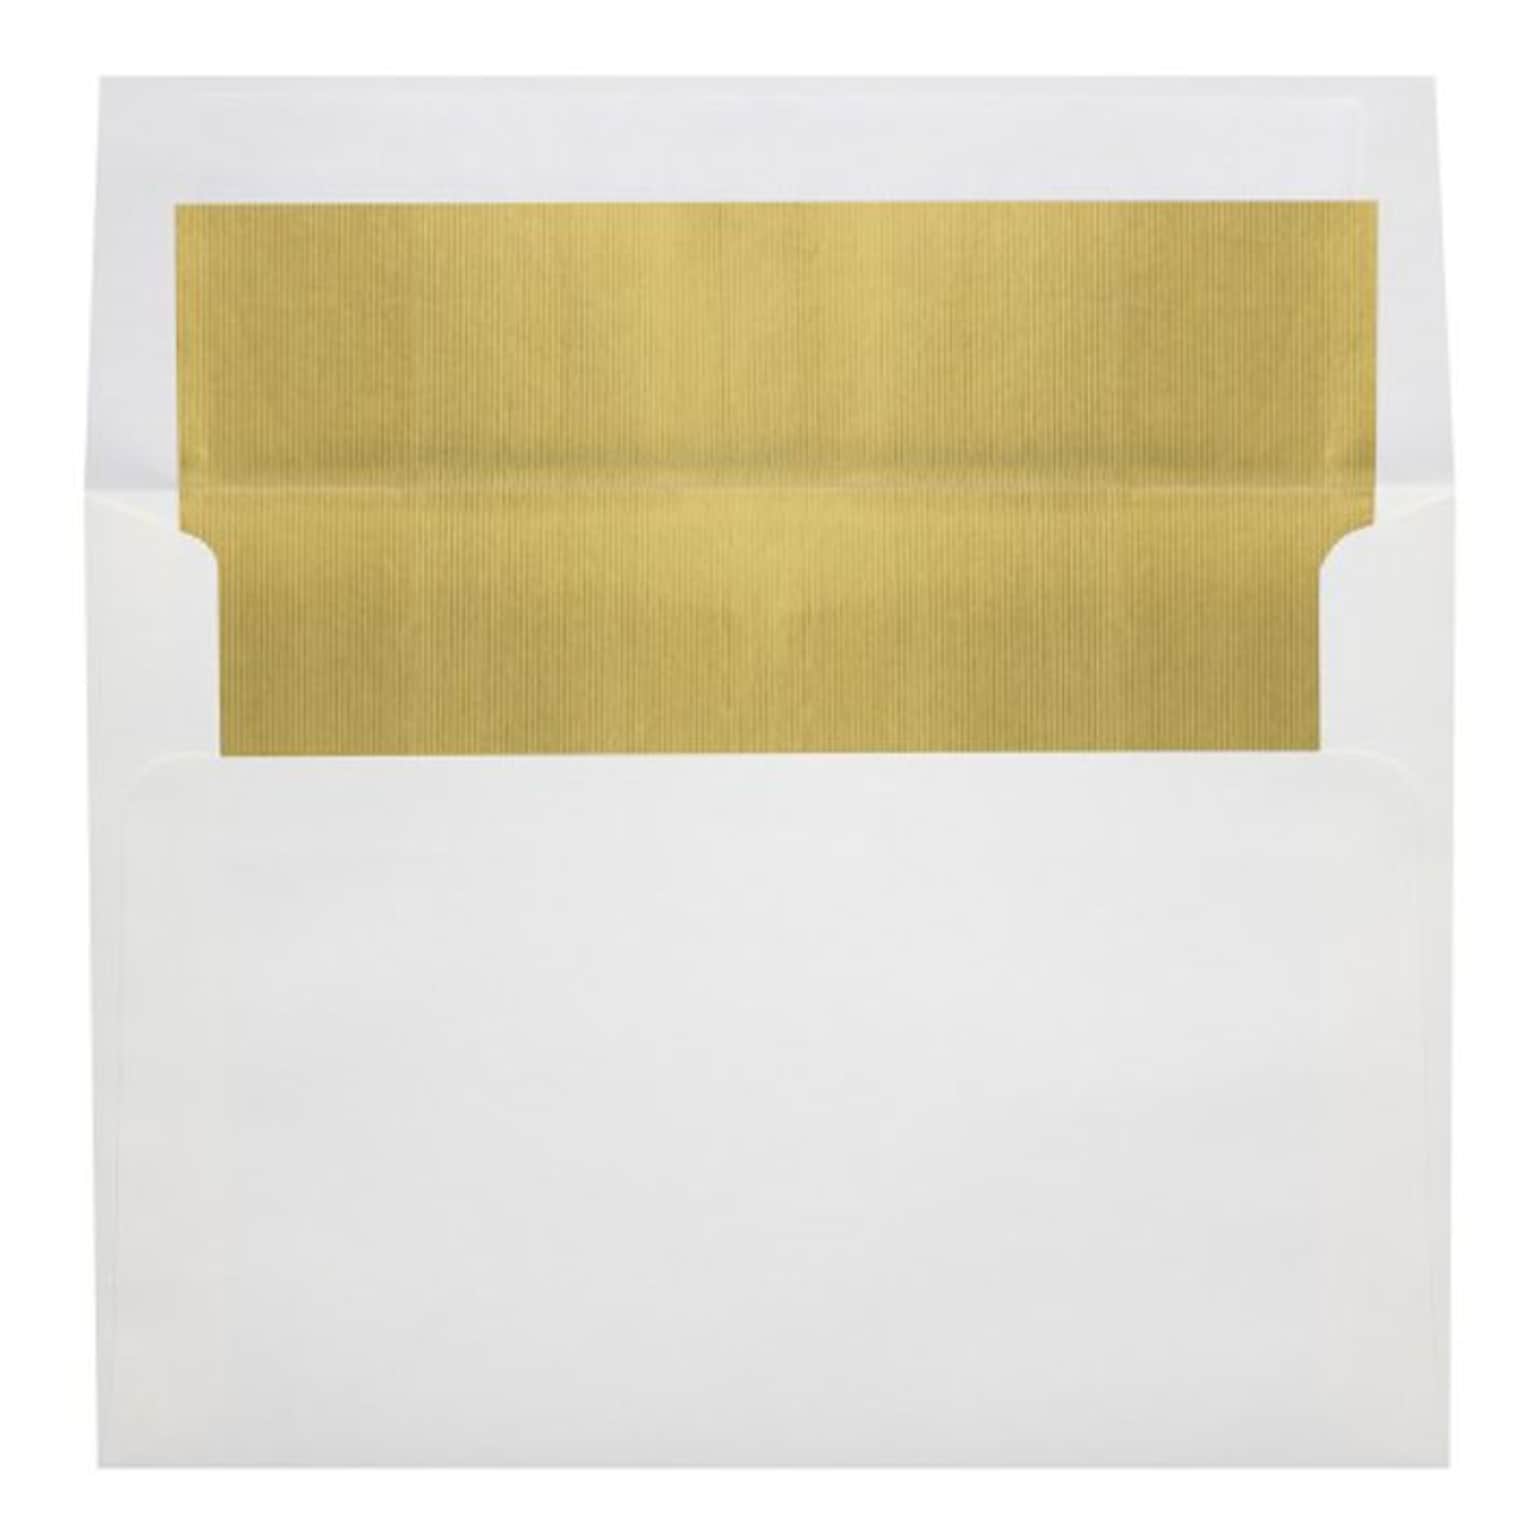 Lux® 5 1/4 x 7 1/4 60lbs. Lined Envelopes W/Peel & Press; White/Gold LUX Lining